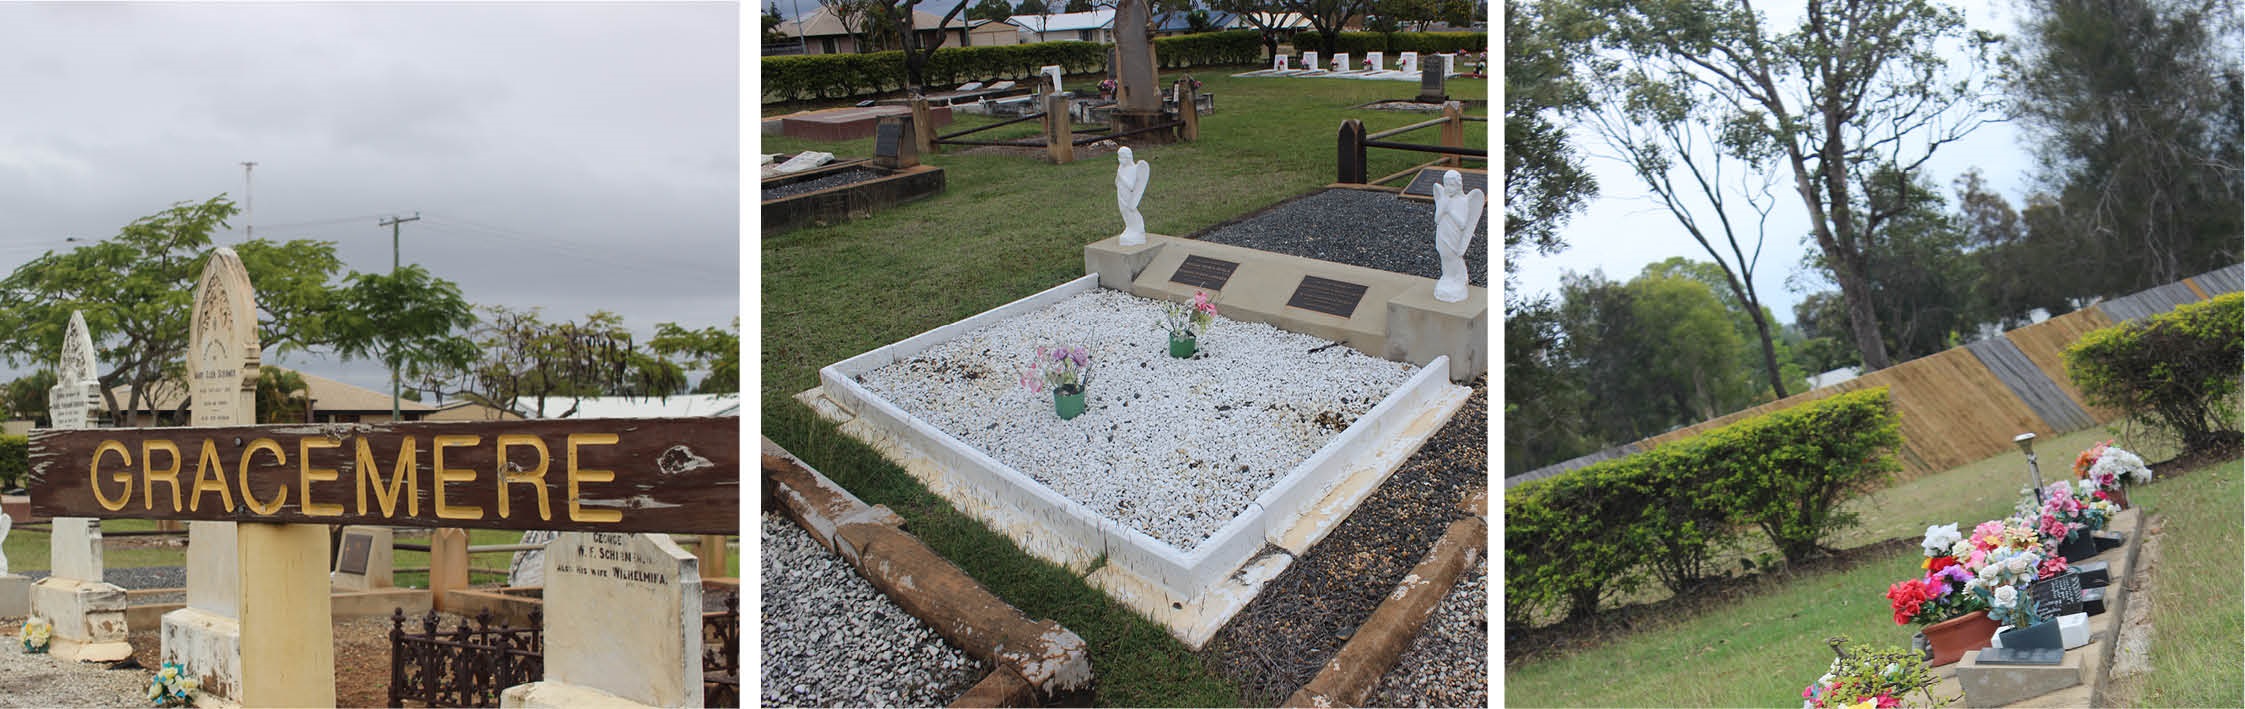 Gracemere Cemetery